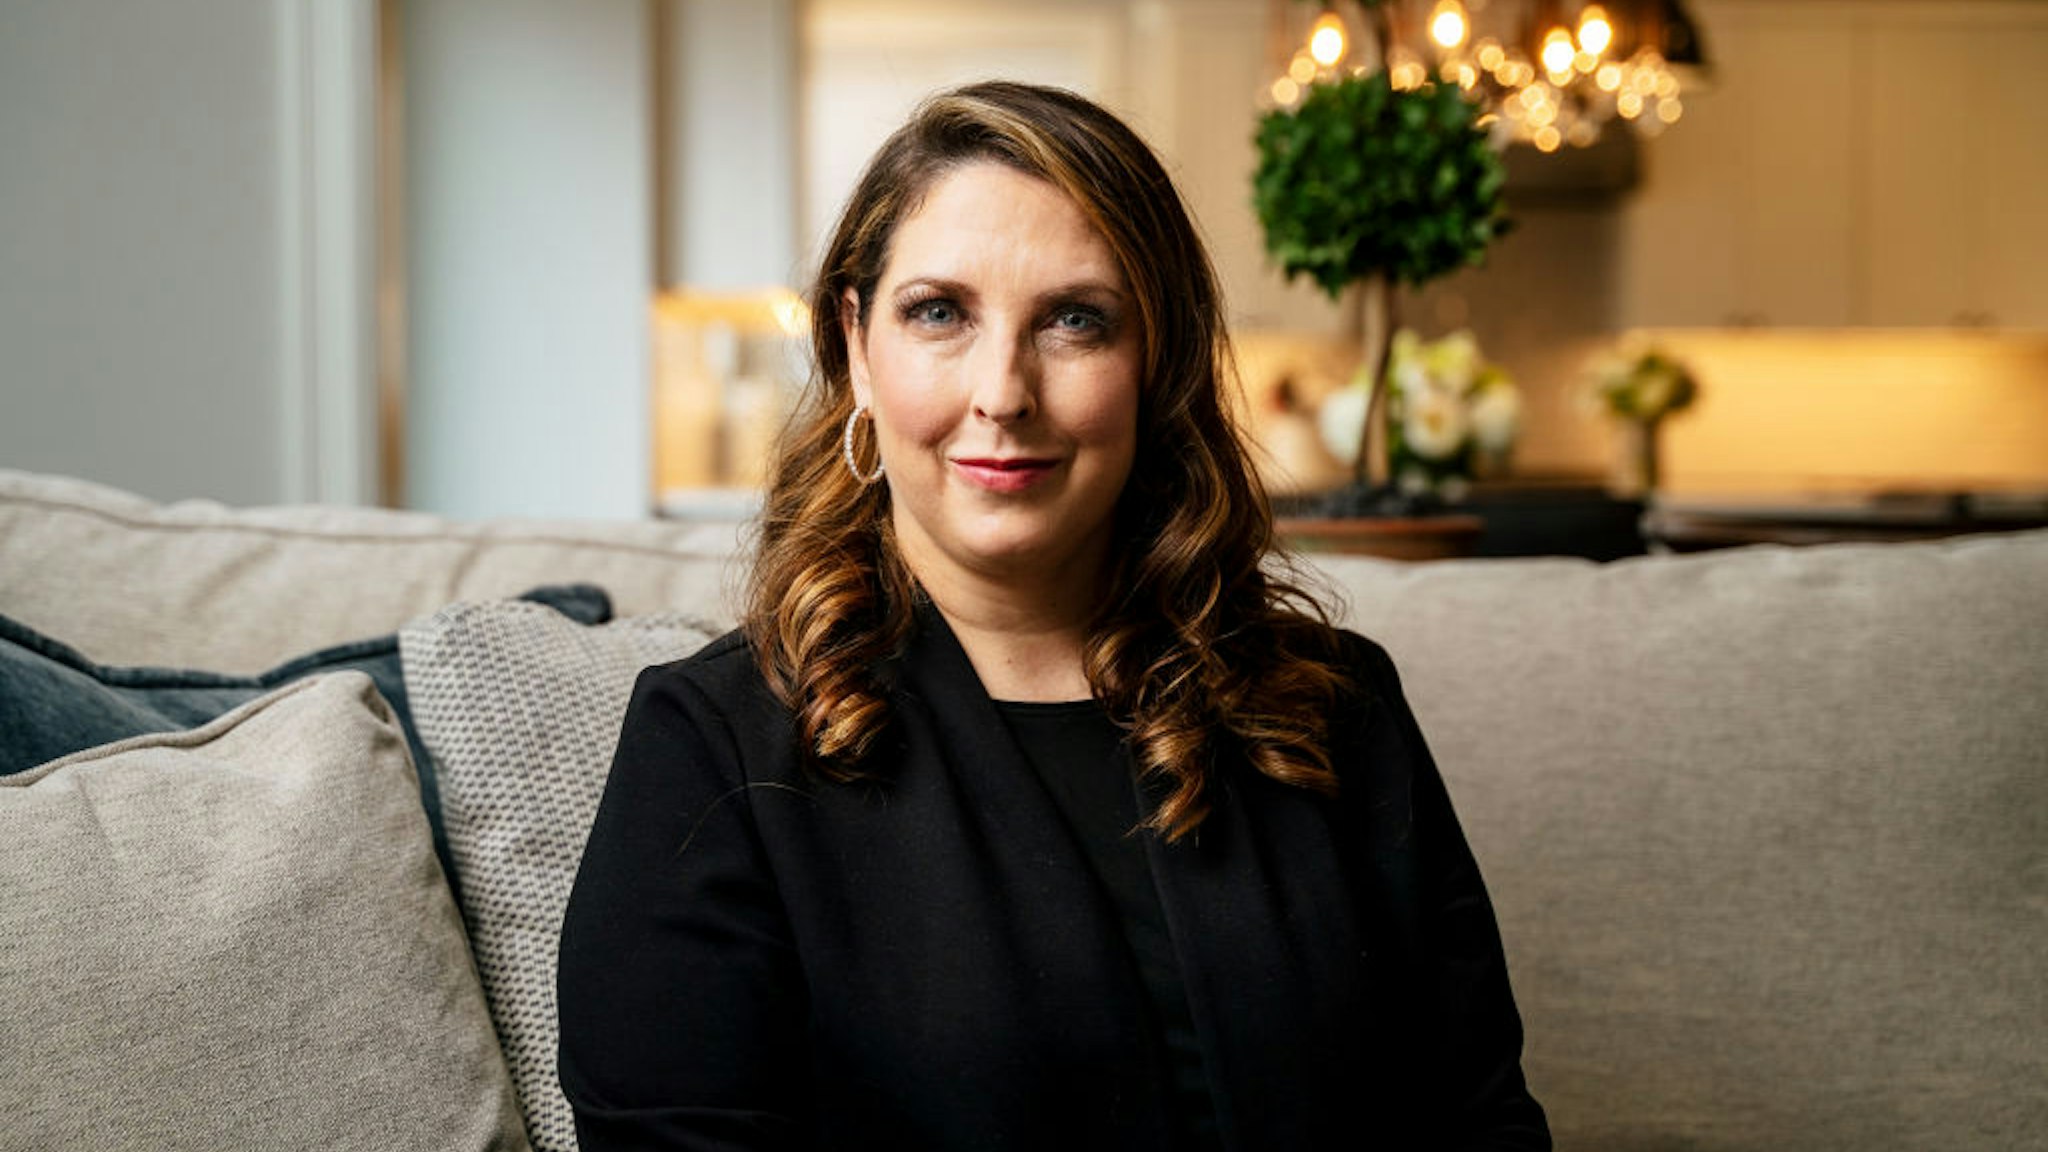 Unspecified, MI - January 16, 2021: Ronna McDaniel, Chair of the Republican National Committee, photographed in her Michigan home. (Photo by Nick Hagen for The Washington Post via Getty Images)